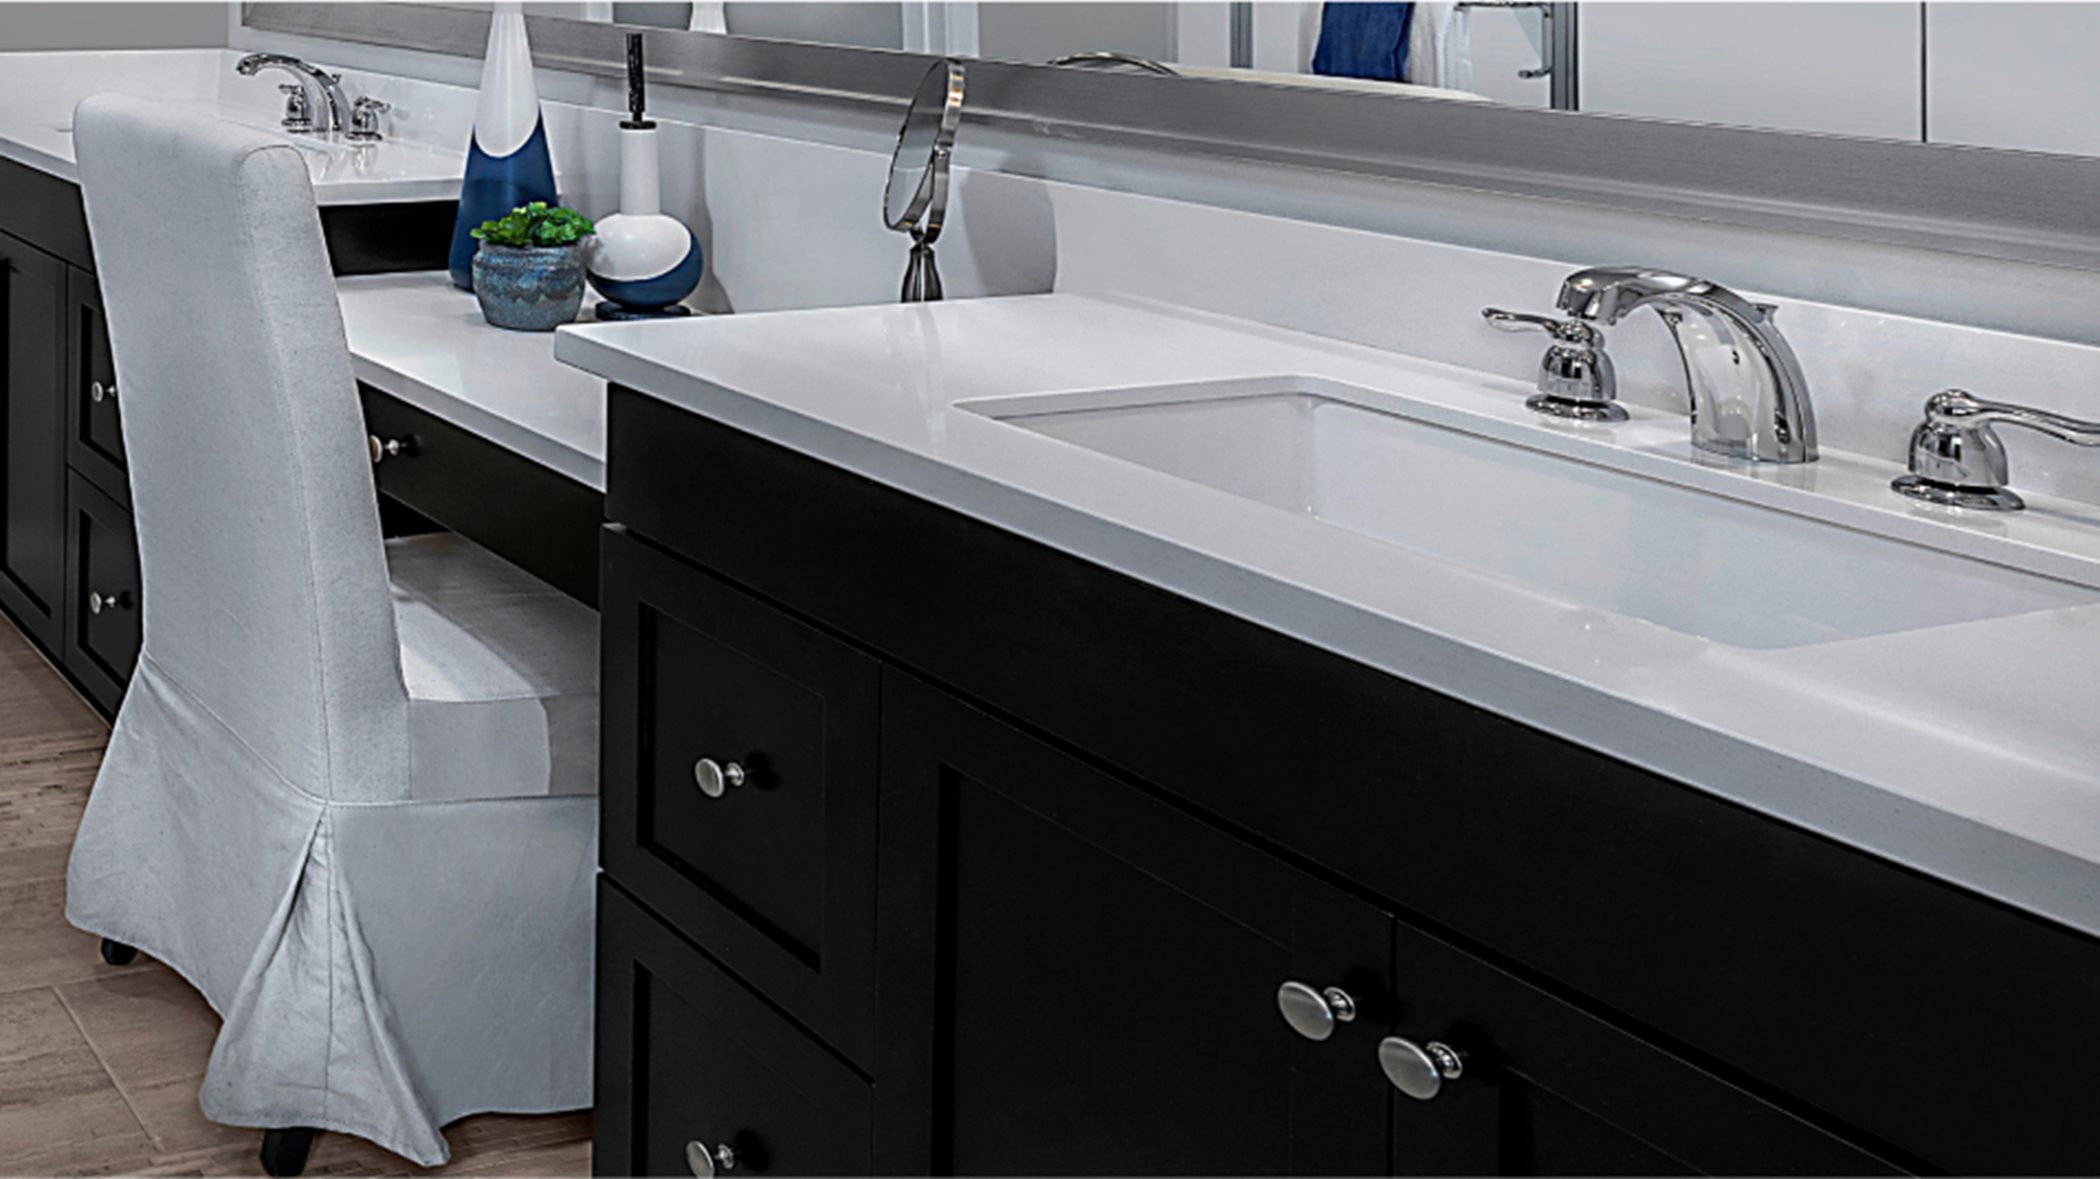 Parklane Everly Residence Two sinks